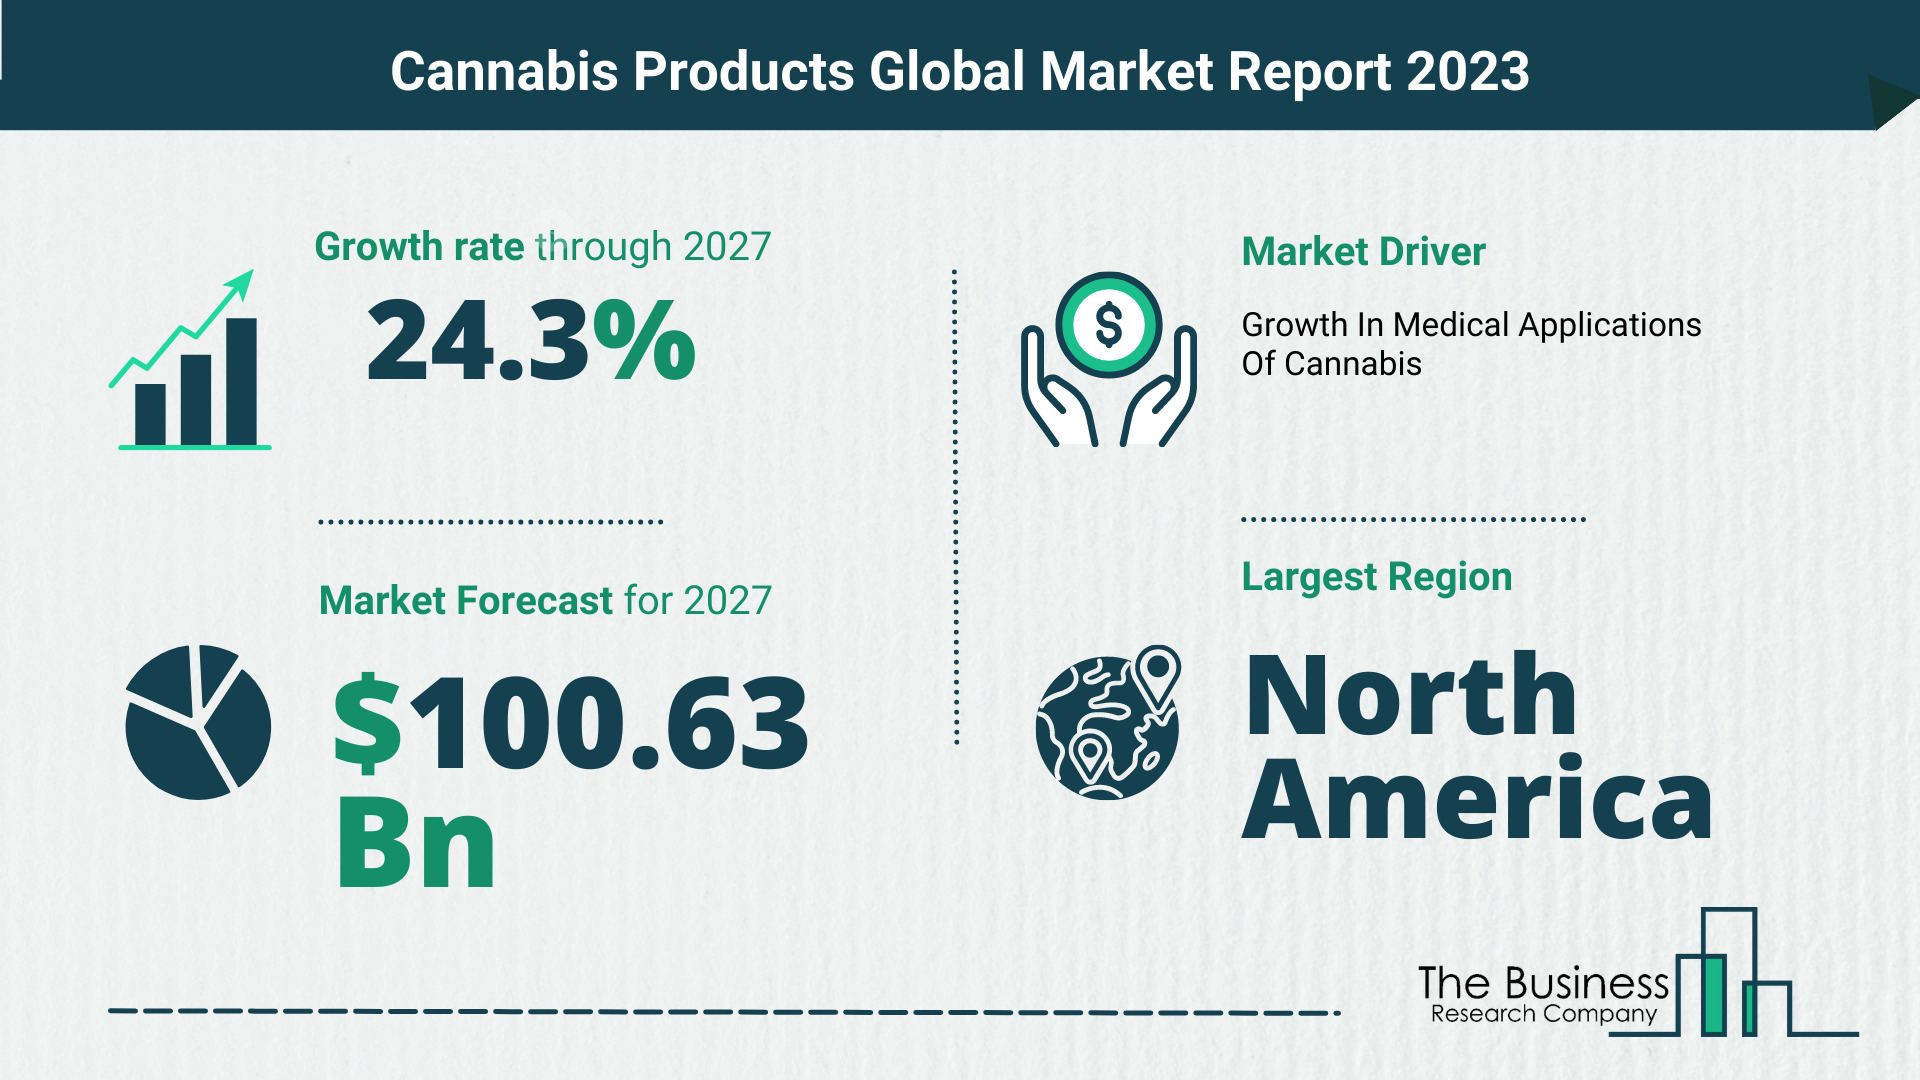 Cannabis Products Market Overview: Market Size, Drivers And Trends